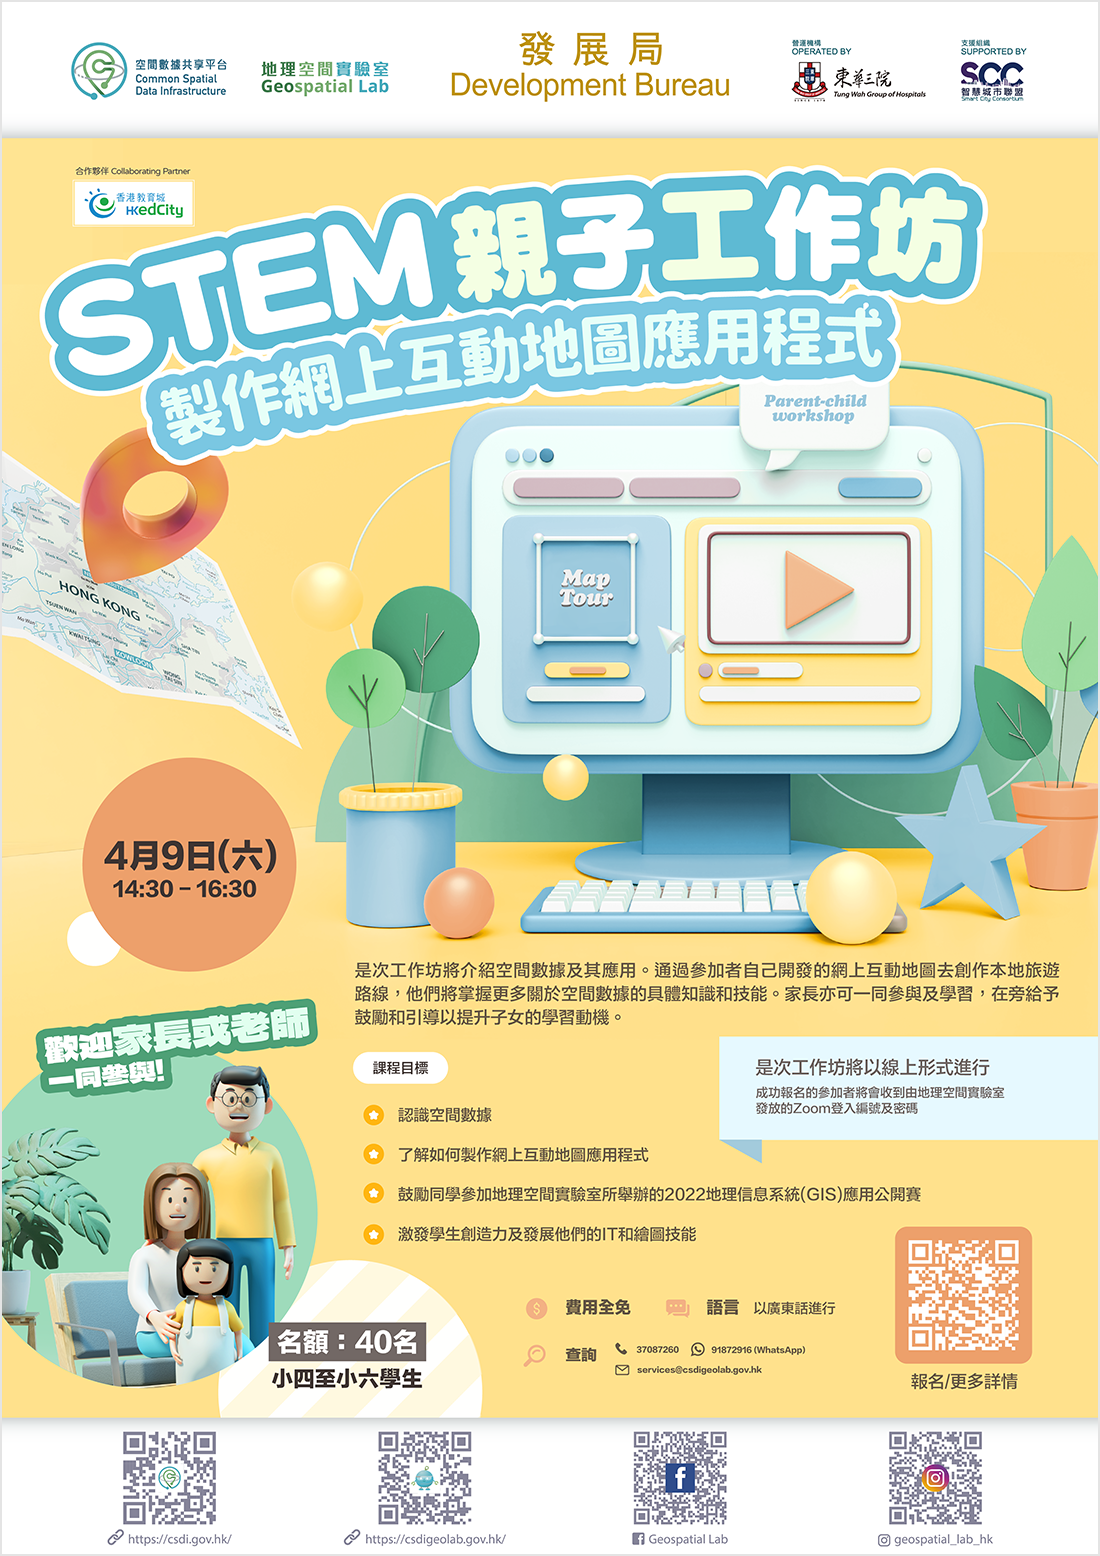 STEM Parent-child Workshop - Create an Interactive Web Mapping Application